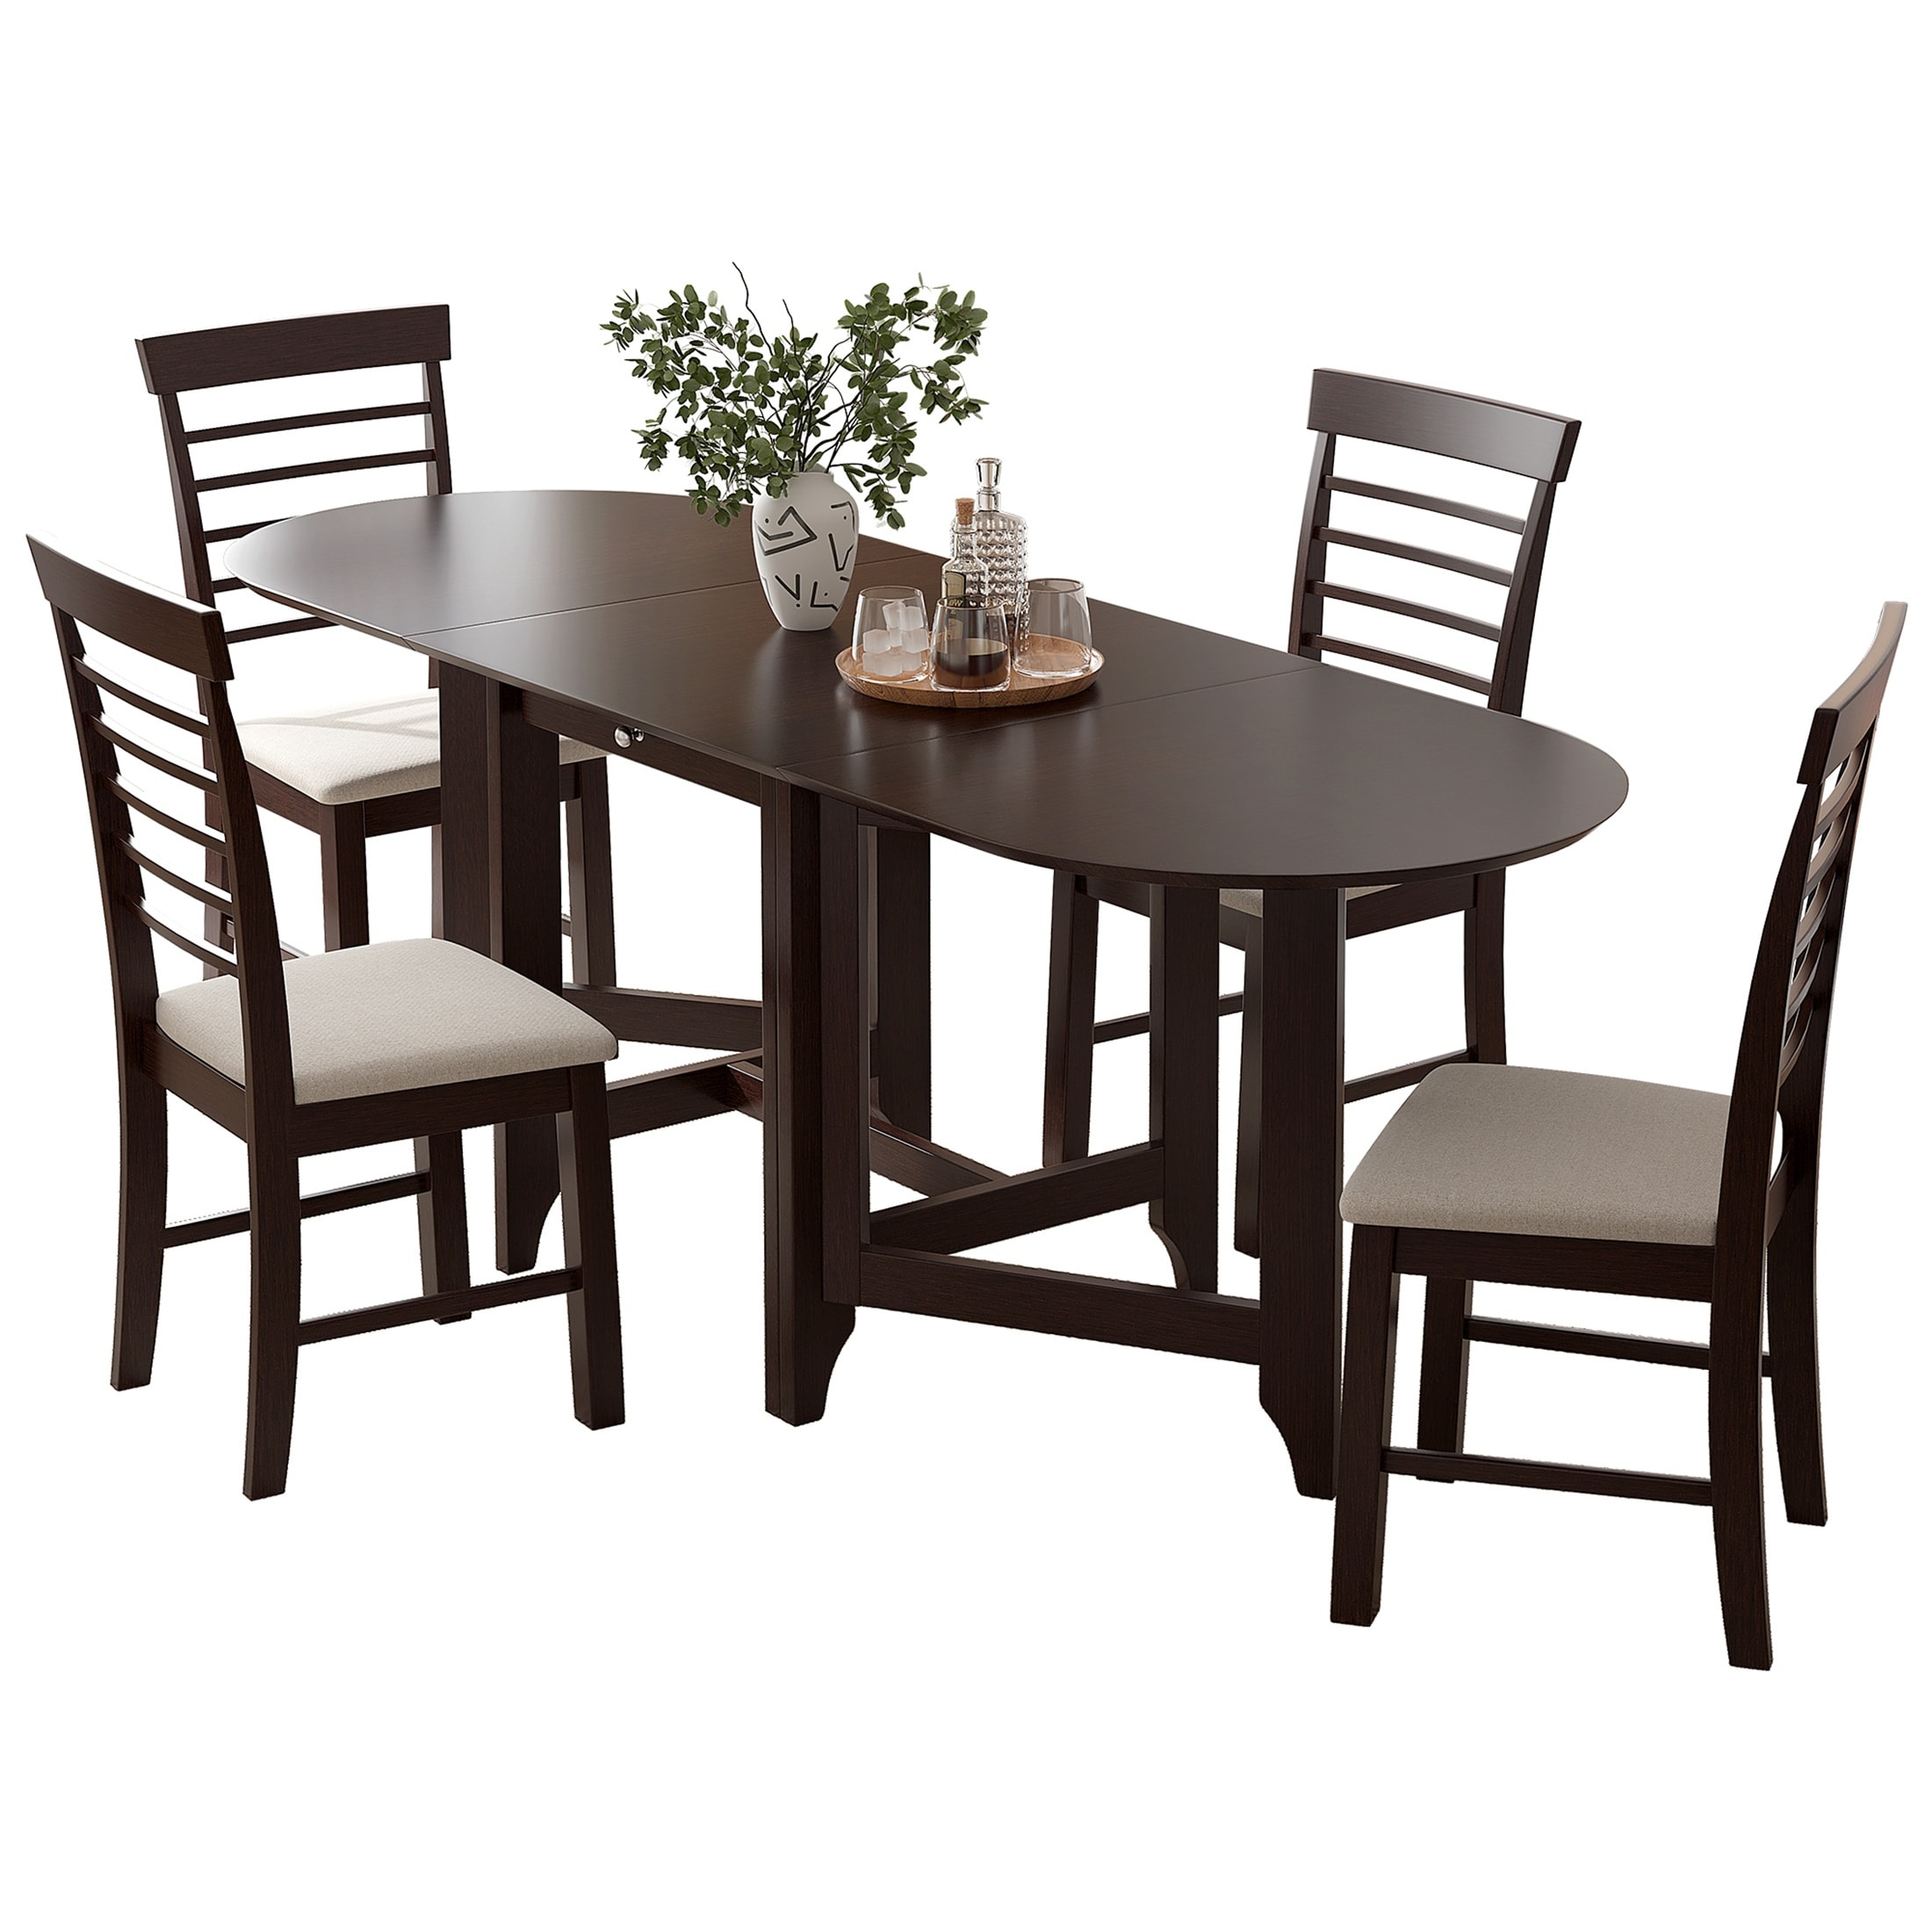 5PC Retro Dining Set Drop-Leaf Table and 4 Upholstered Chairs